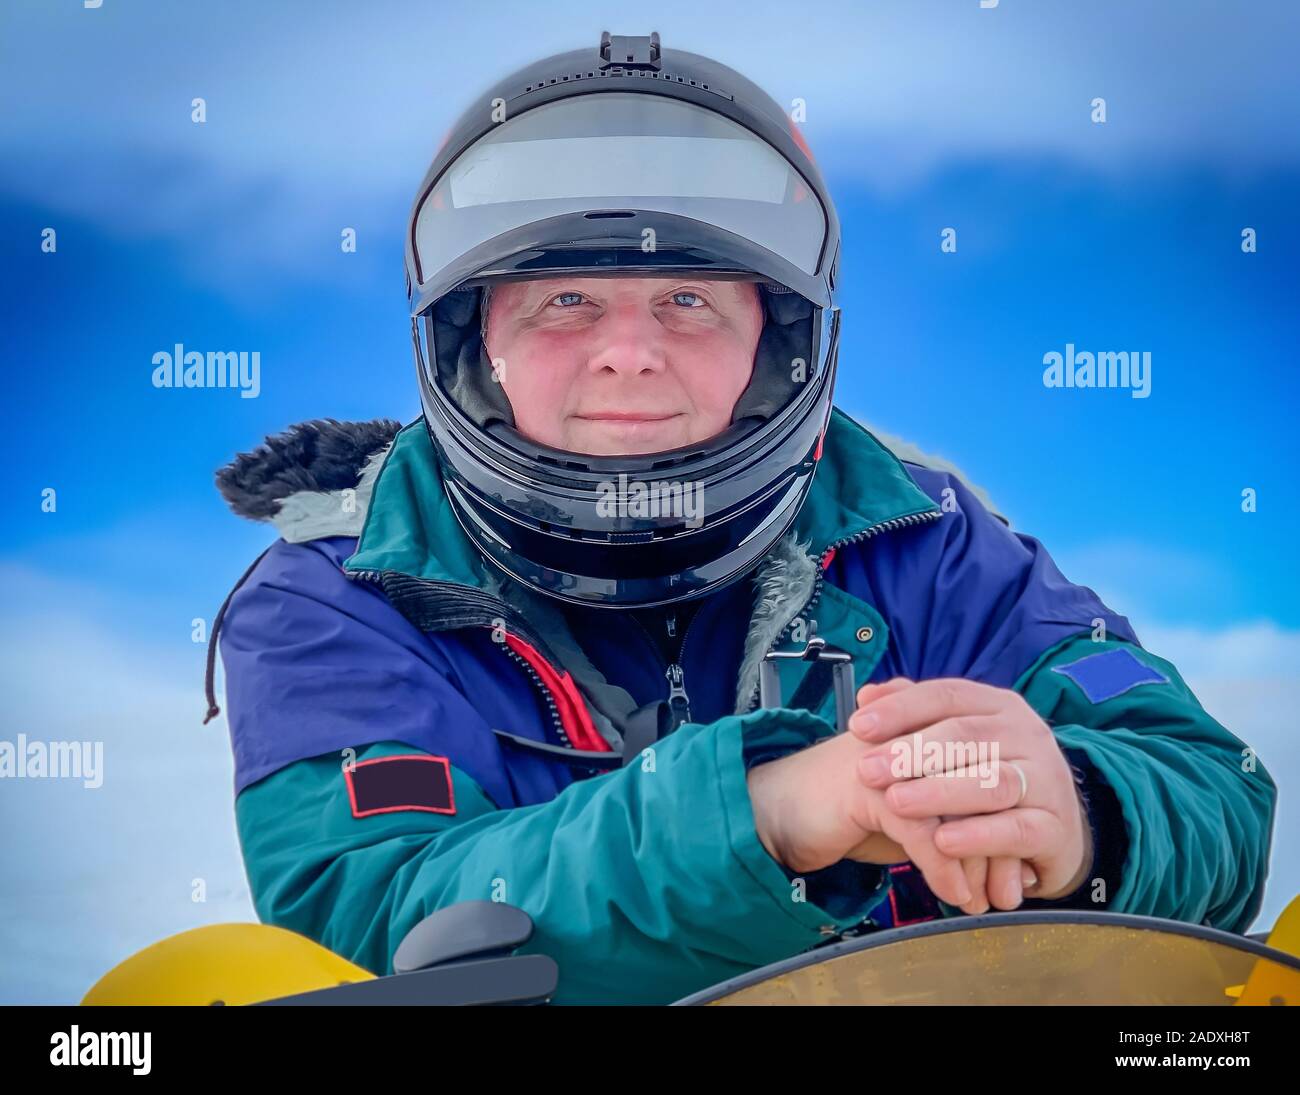 Portait of man on a snowmobile, wearing a helmet, Iceland Stock Photo